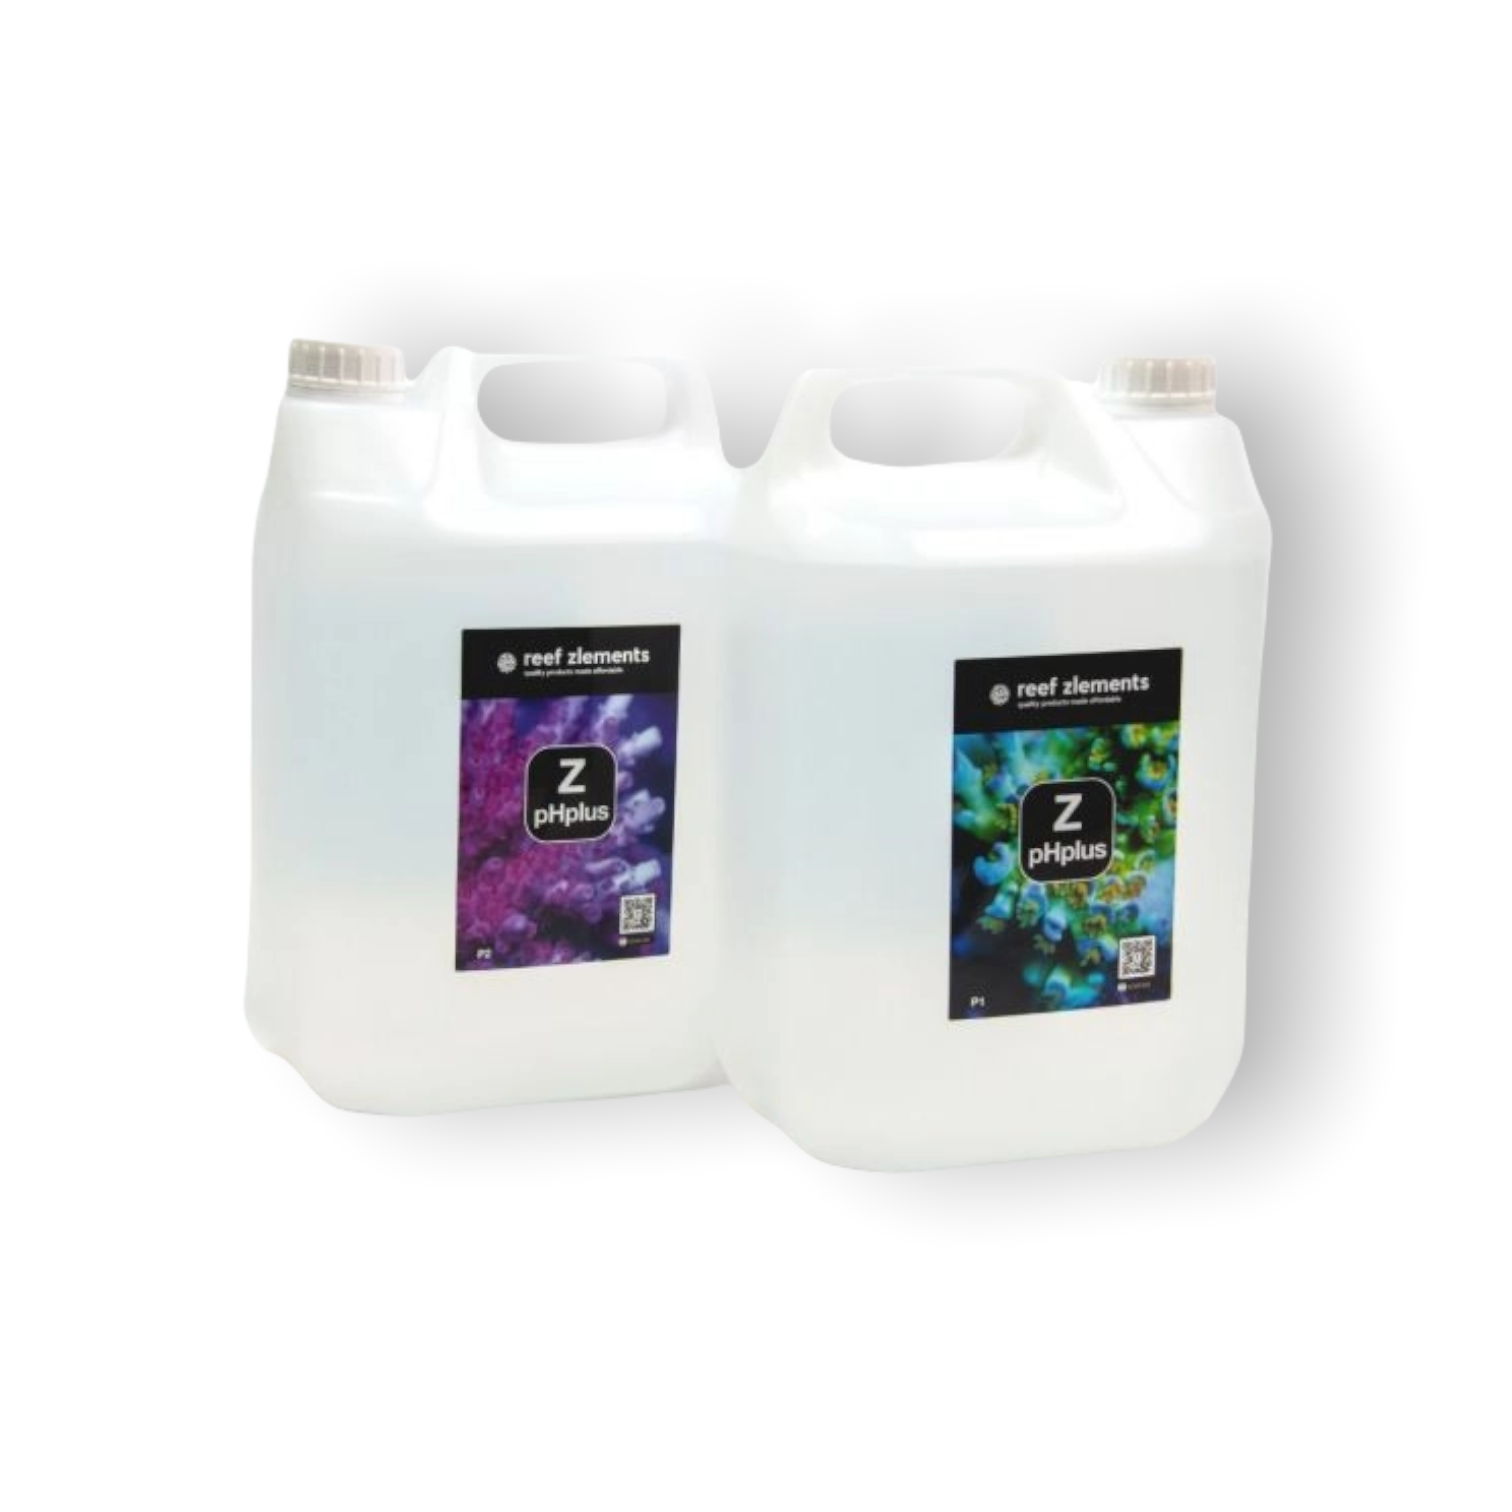 Reef Zlements Z-pHplus 10 Litre (Collection Only)